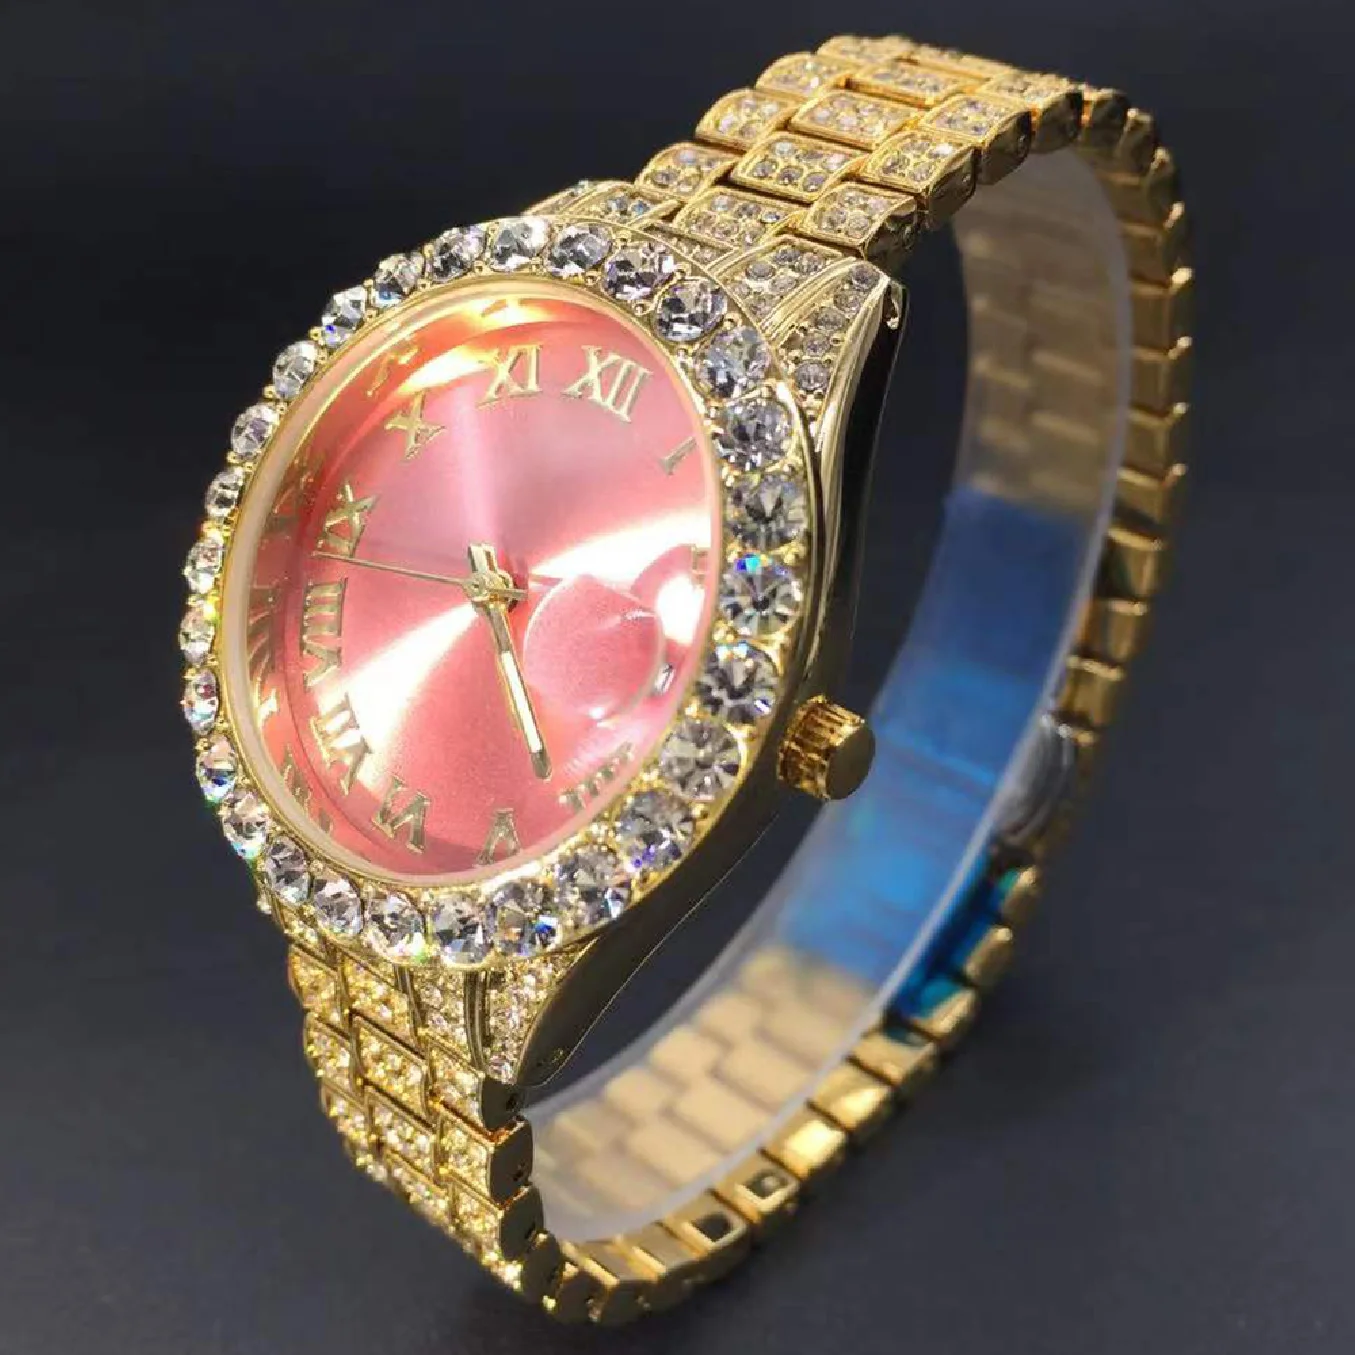 MISSFOX Big Diamond Woman Watches Pink Mother-of-pearl Dial Gold Watch Women Luxury Quartz Round Iced Out Small Wristwatch Lady enlarge